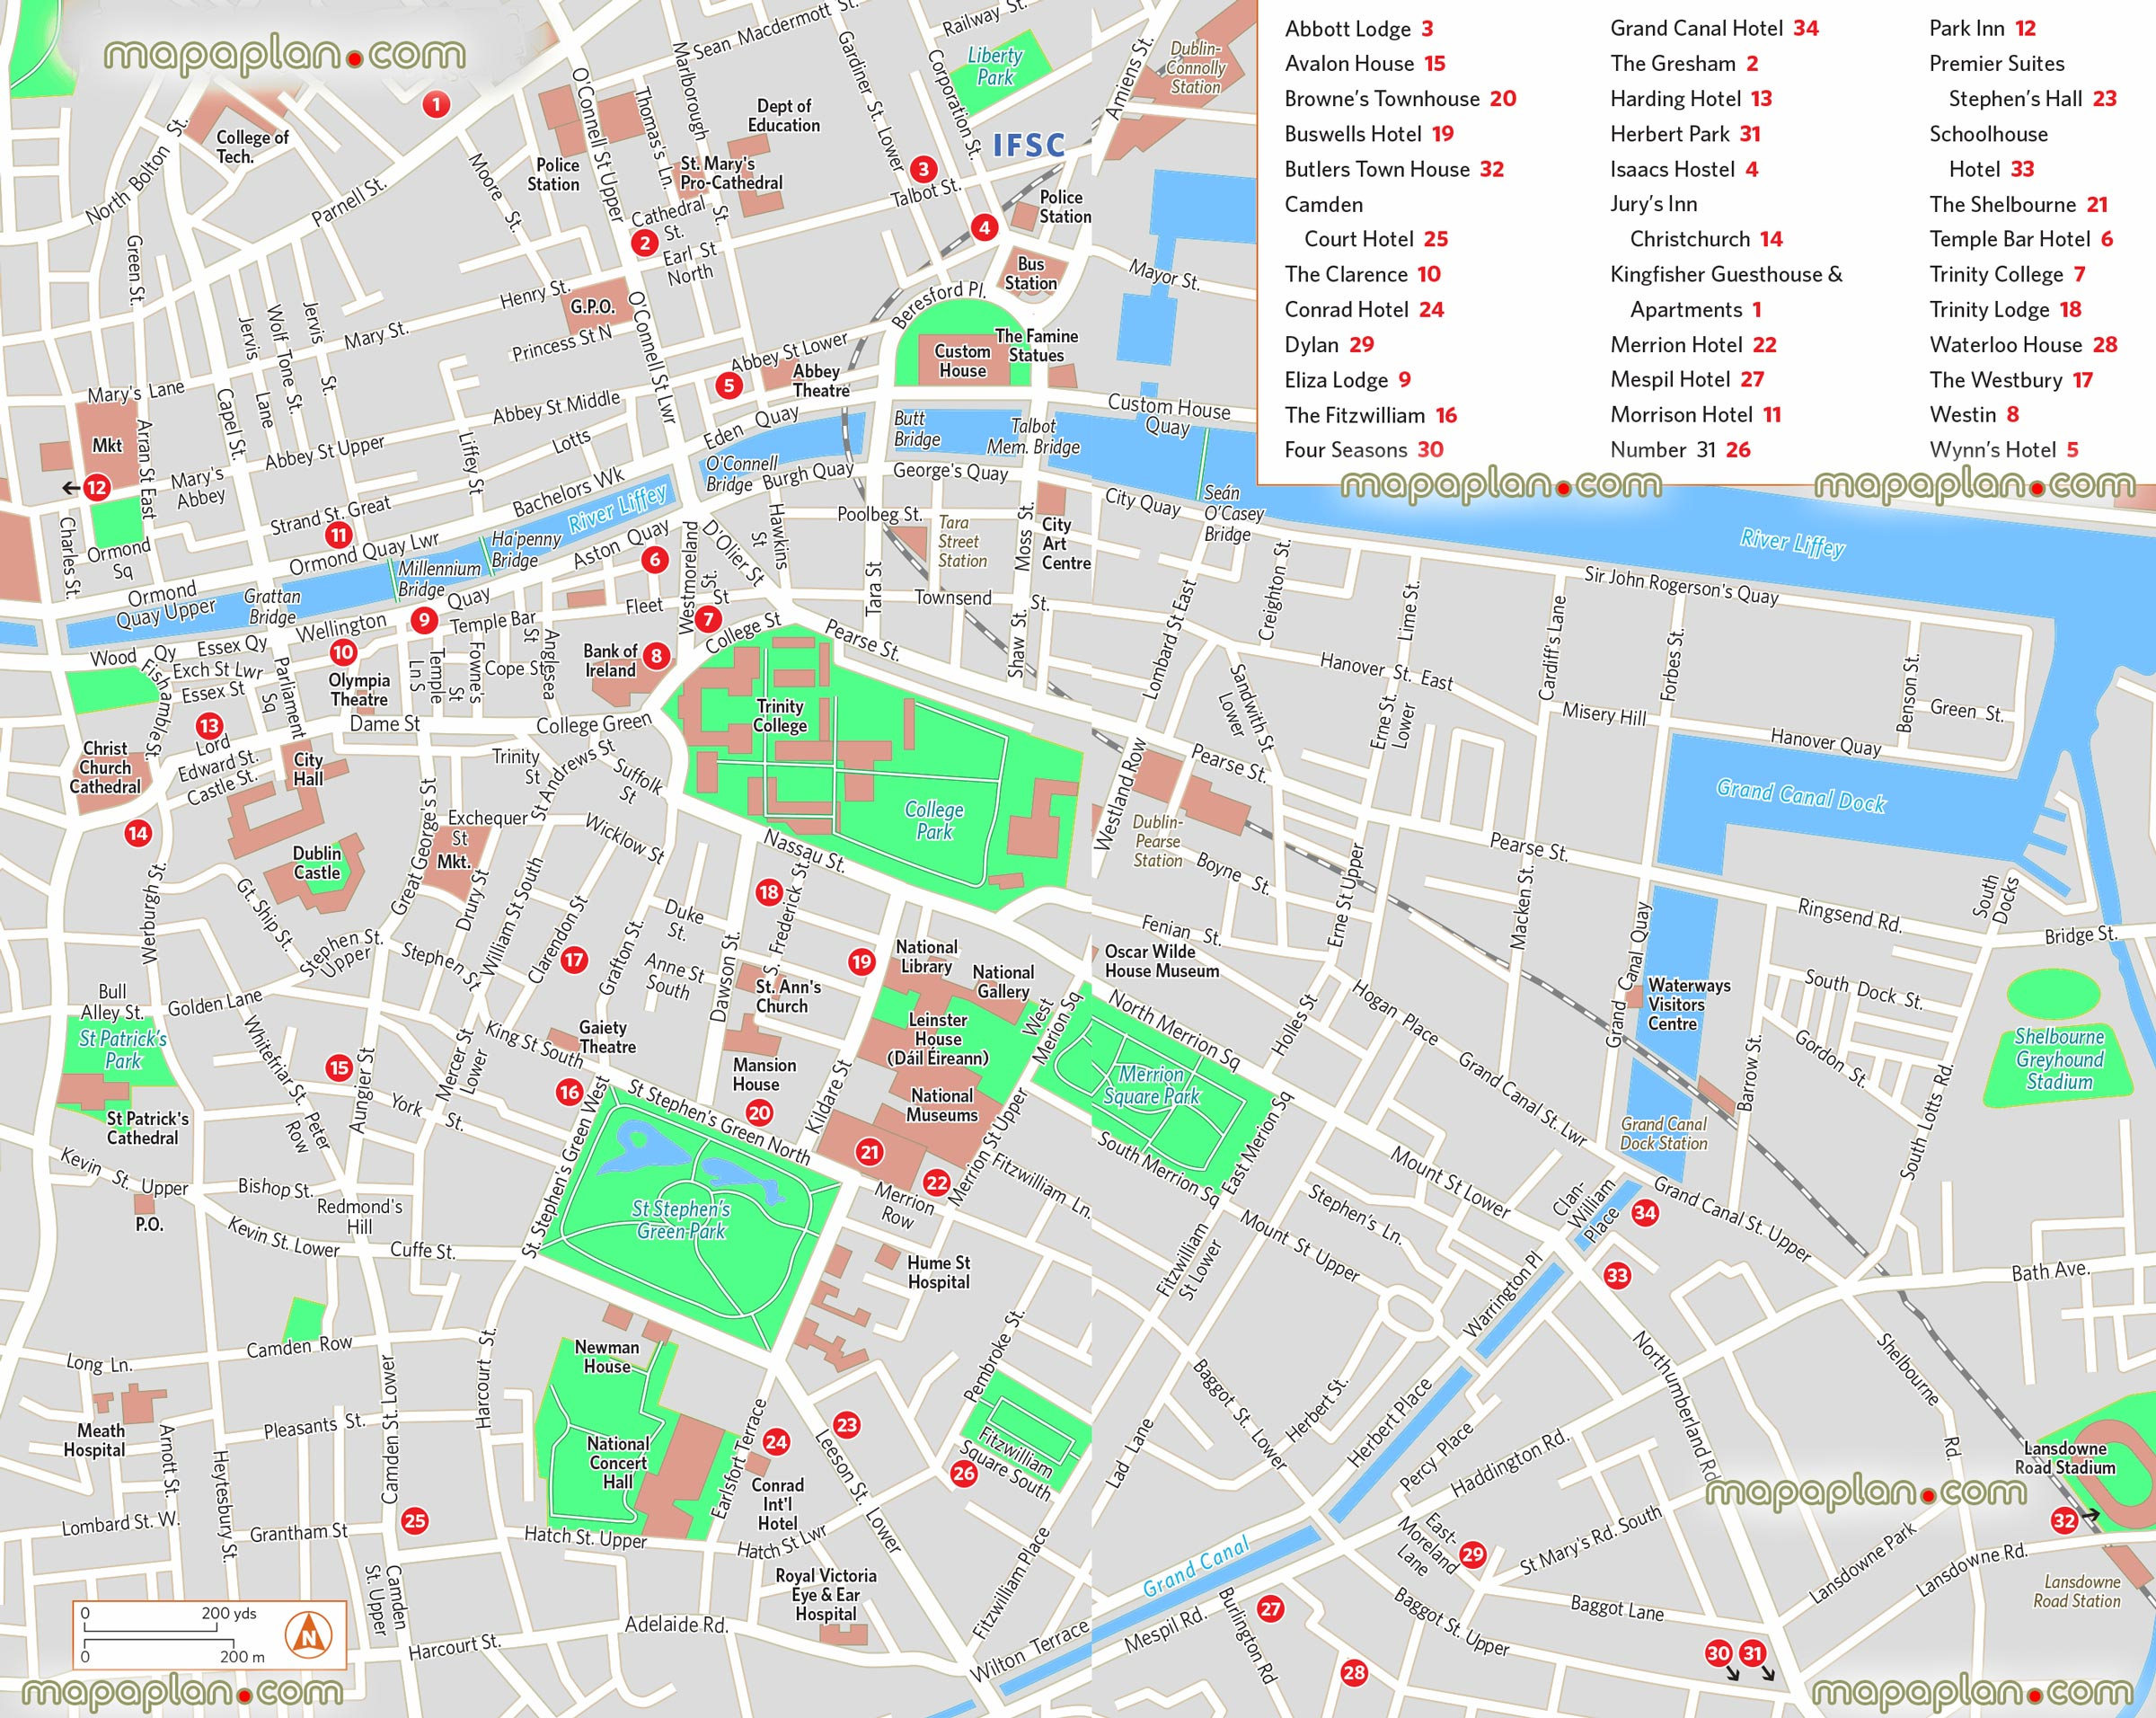 Dublin Map Downtown Dublin Map Of Main Hotels And City 